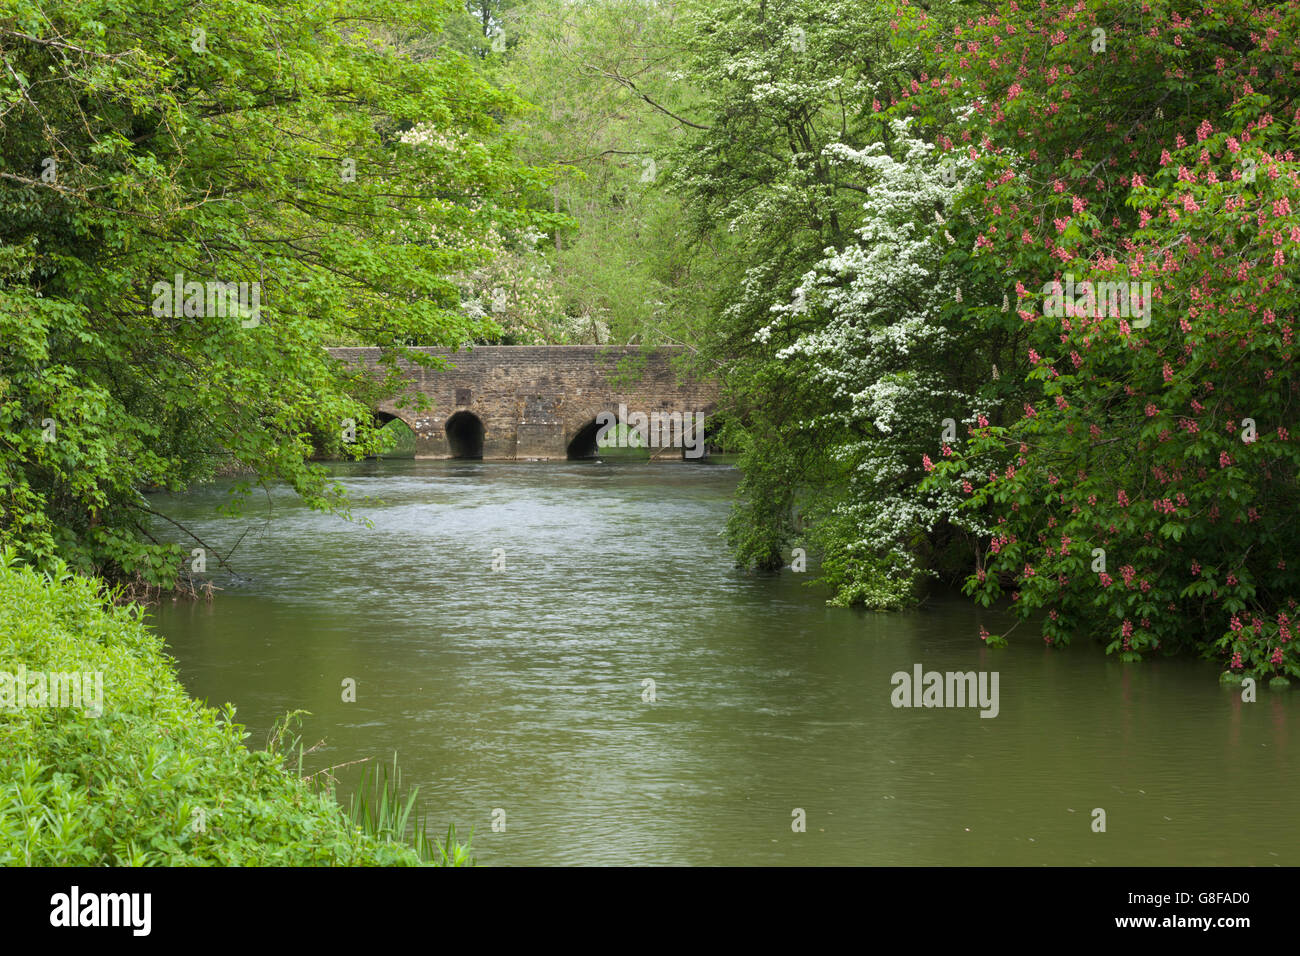 The medieval stone bridge over the River Cherwell marking the boundary of the grounds of  Rousham House in Oxfordshire, England Stock Photo